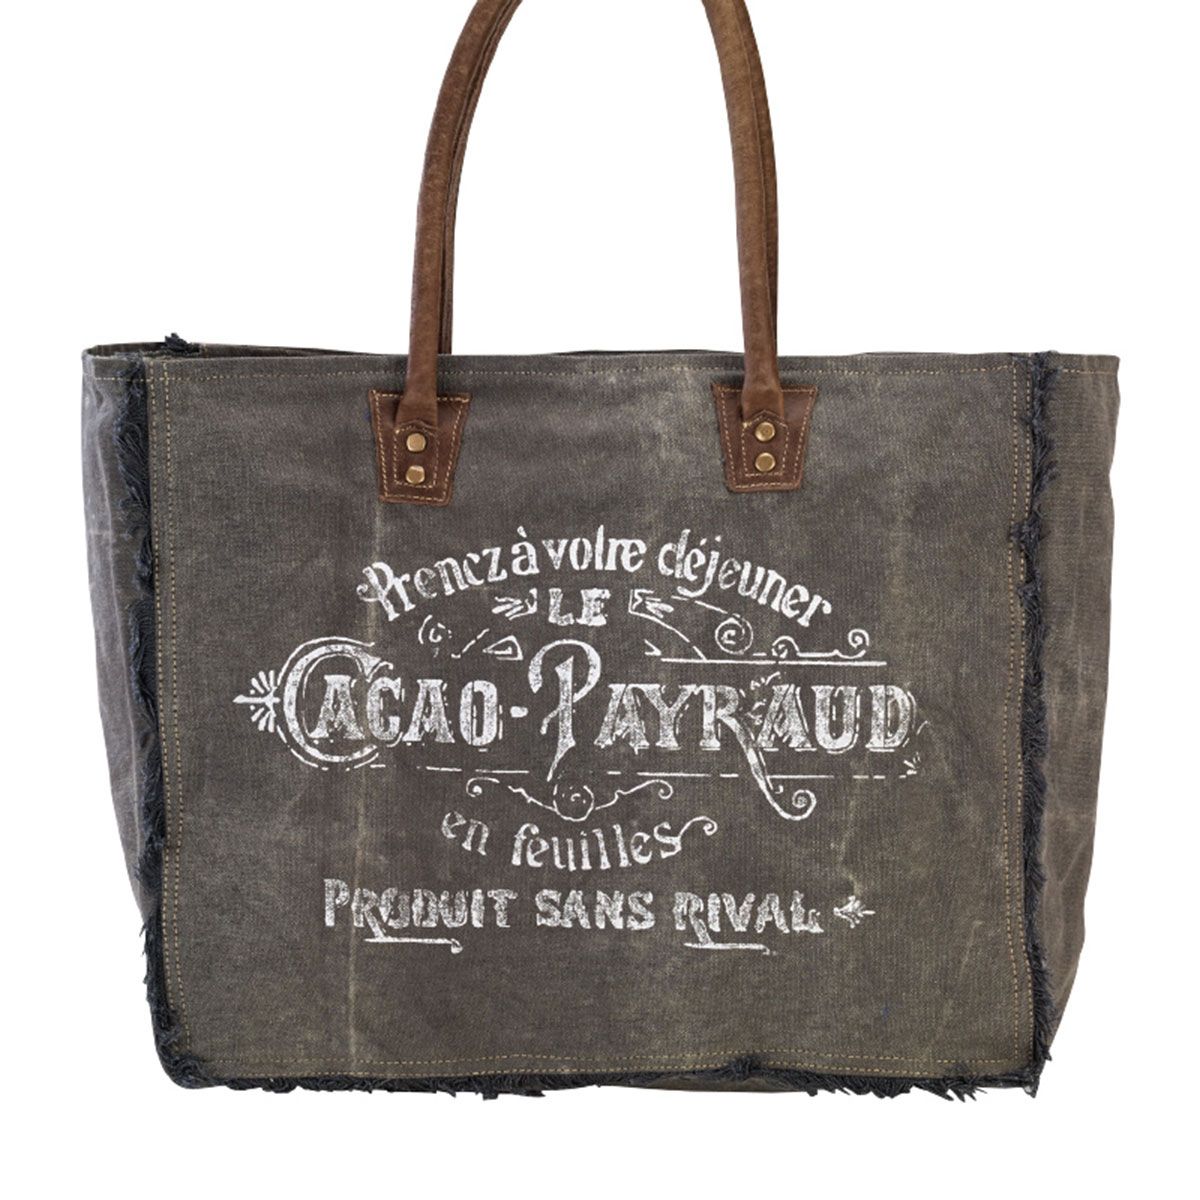 French Cacao-Payraud Re-purposed Tent Canvas Tote Bag by Clea Ray